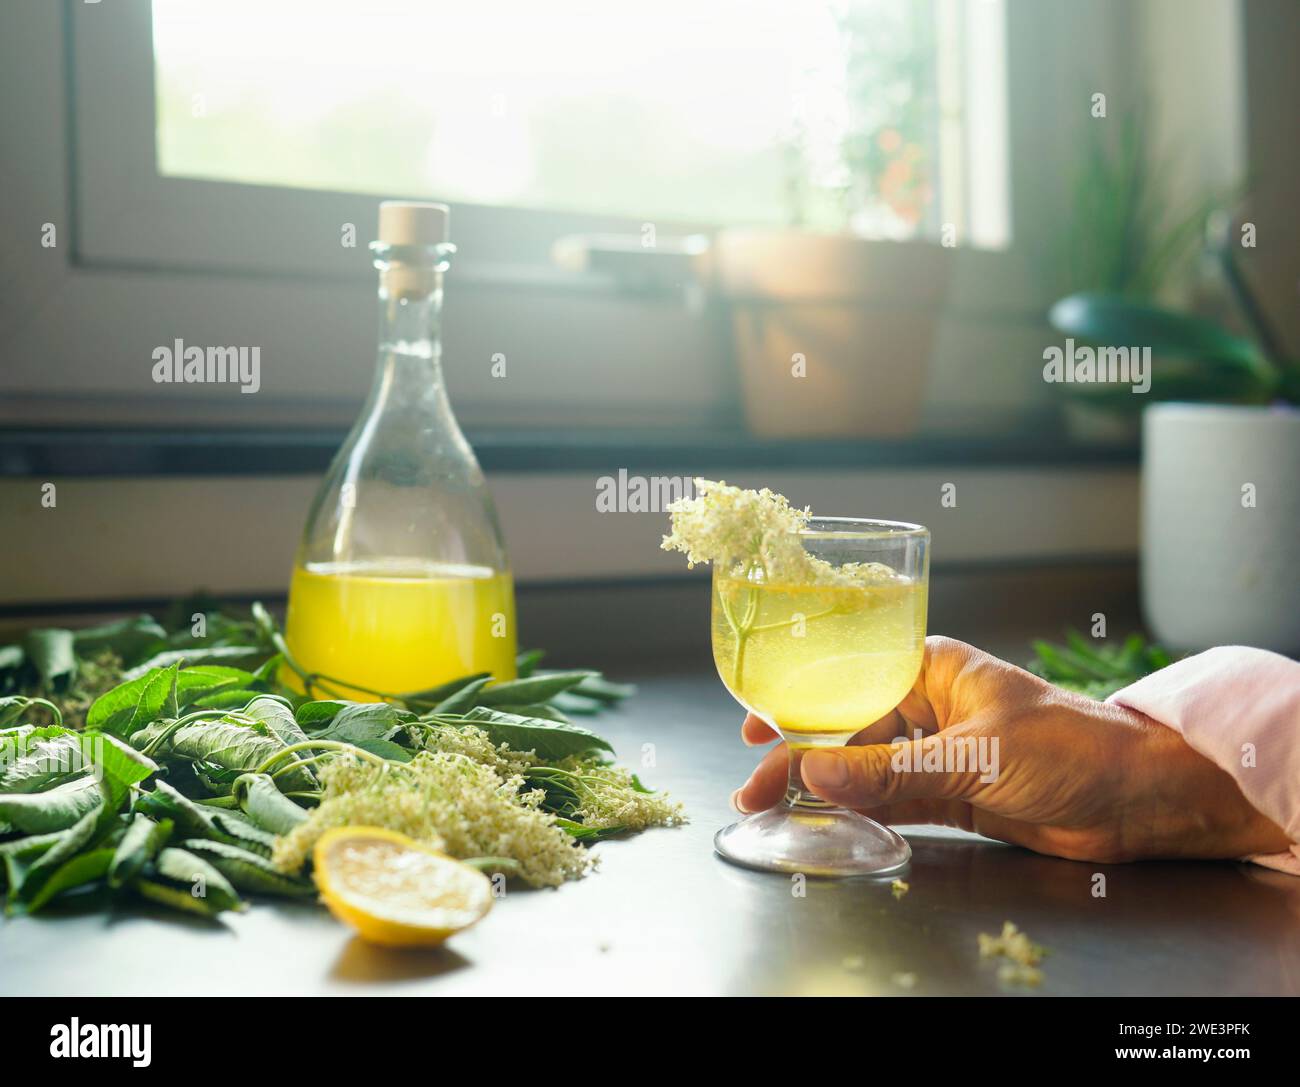 Women hand holding glass of delicious elderflower liqueur on table with elderflowers branches and lemon. Front view Stock Photo